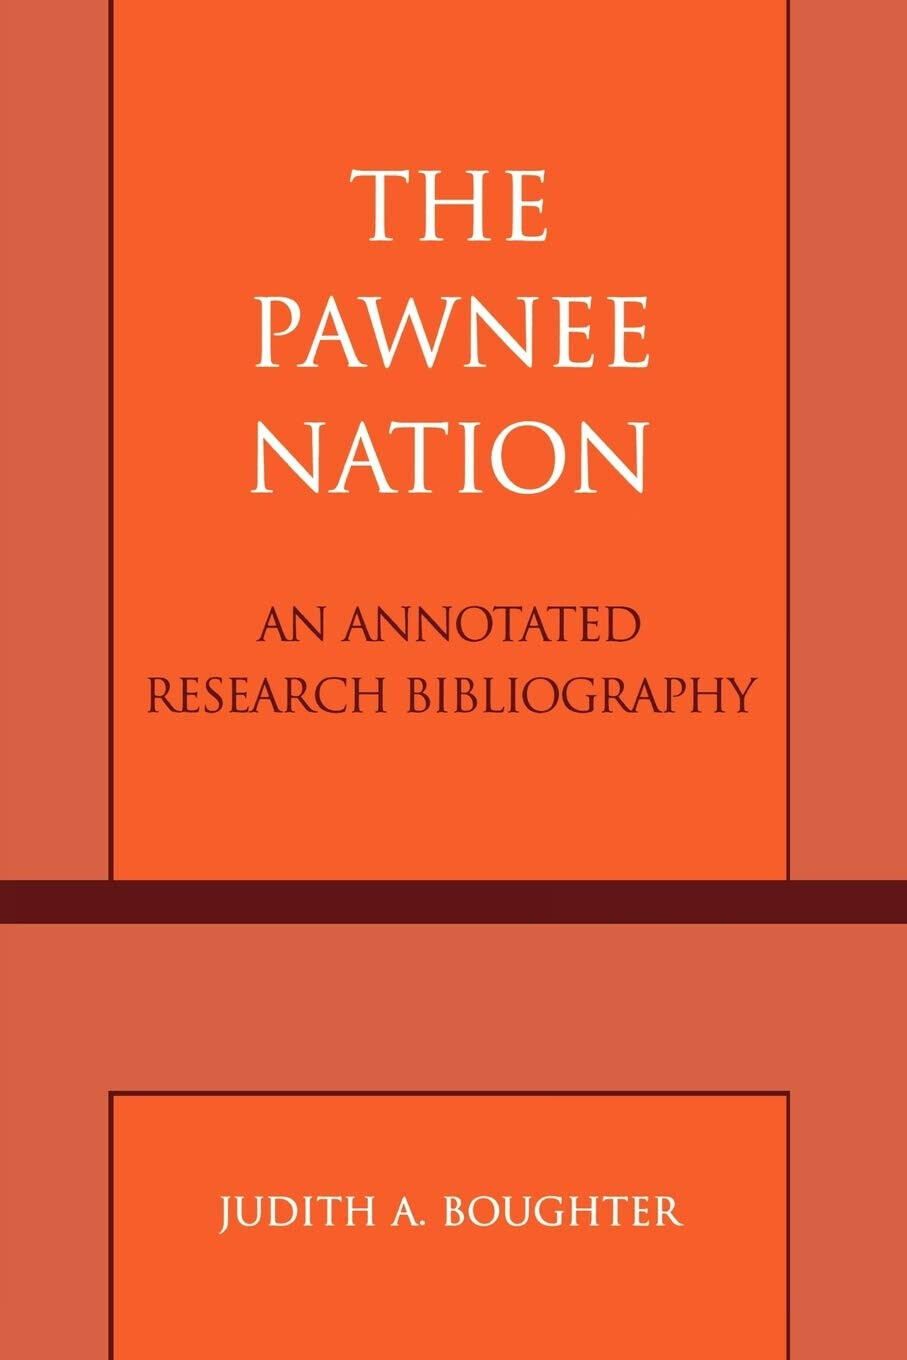 The Pawnee Nation -  Judith A. Boughter - Scarecrow, 2004